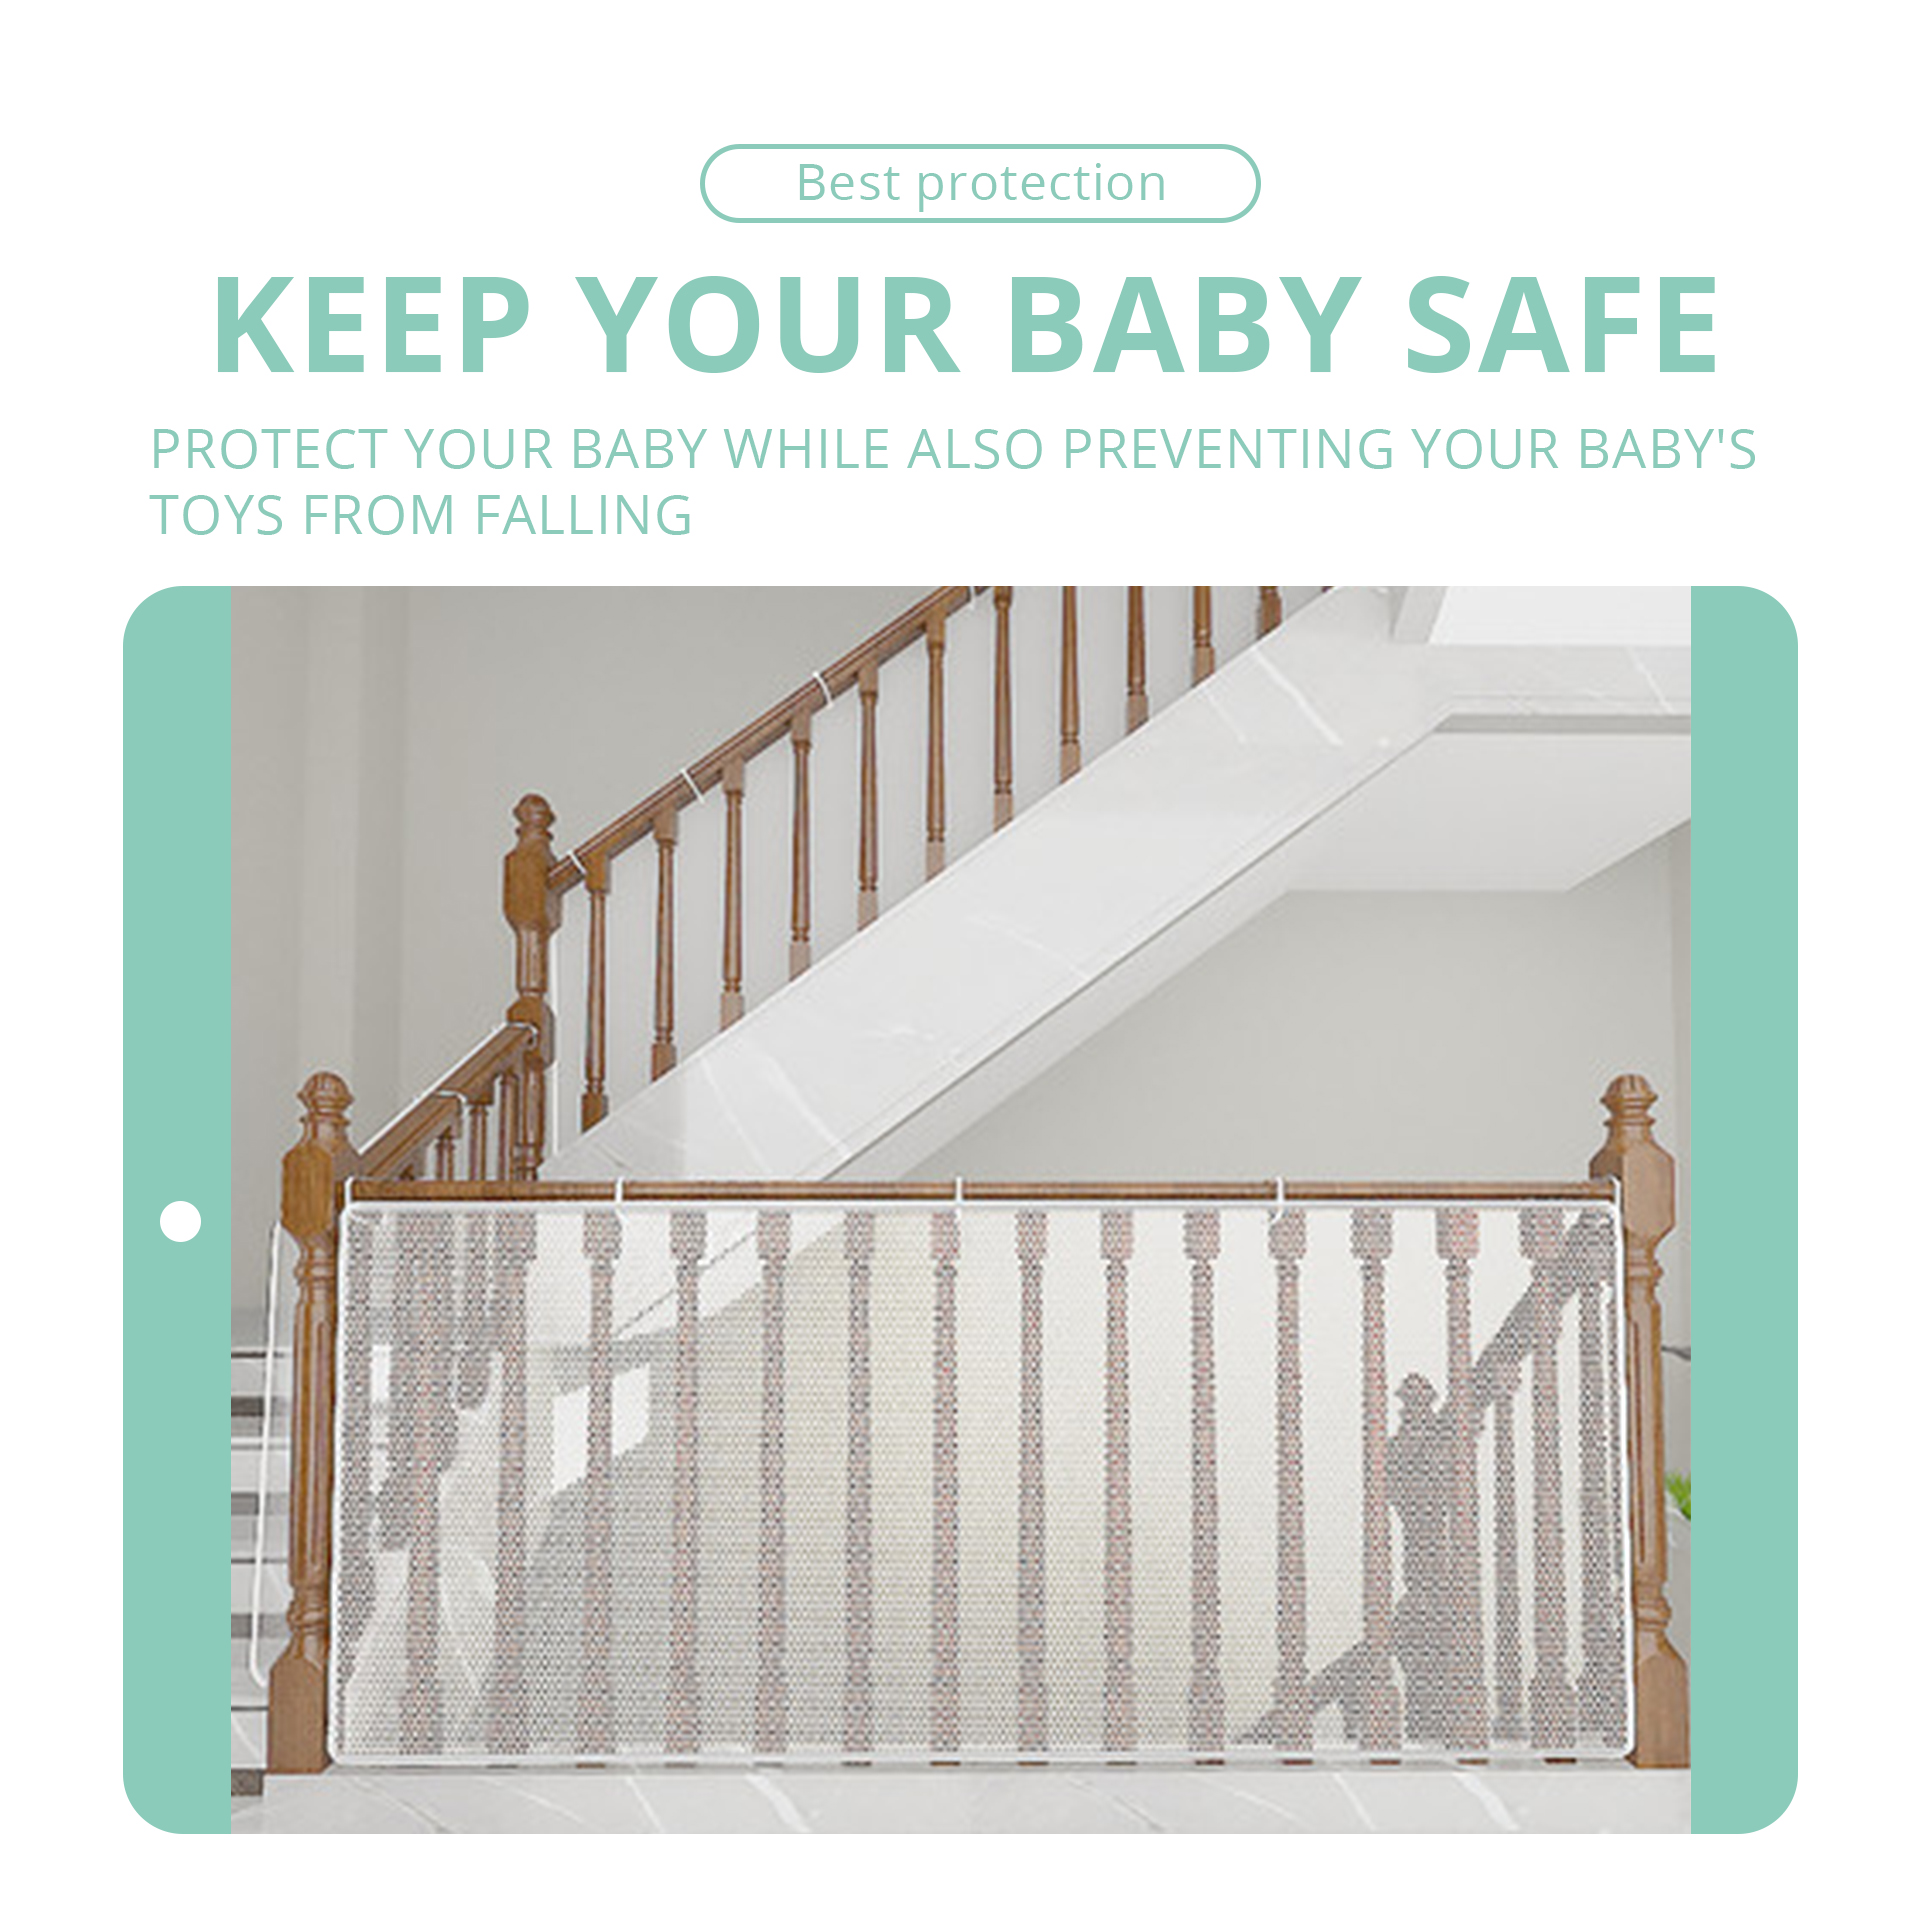 Baby Stair Protective Cover To Prevent Stuck Limbs, Prevent Toys From Falling, Balcony Protective Handrail, Protective Stair Dec